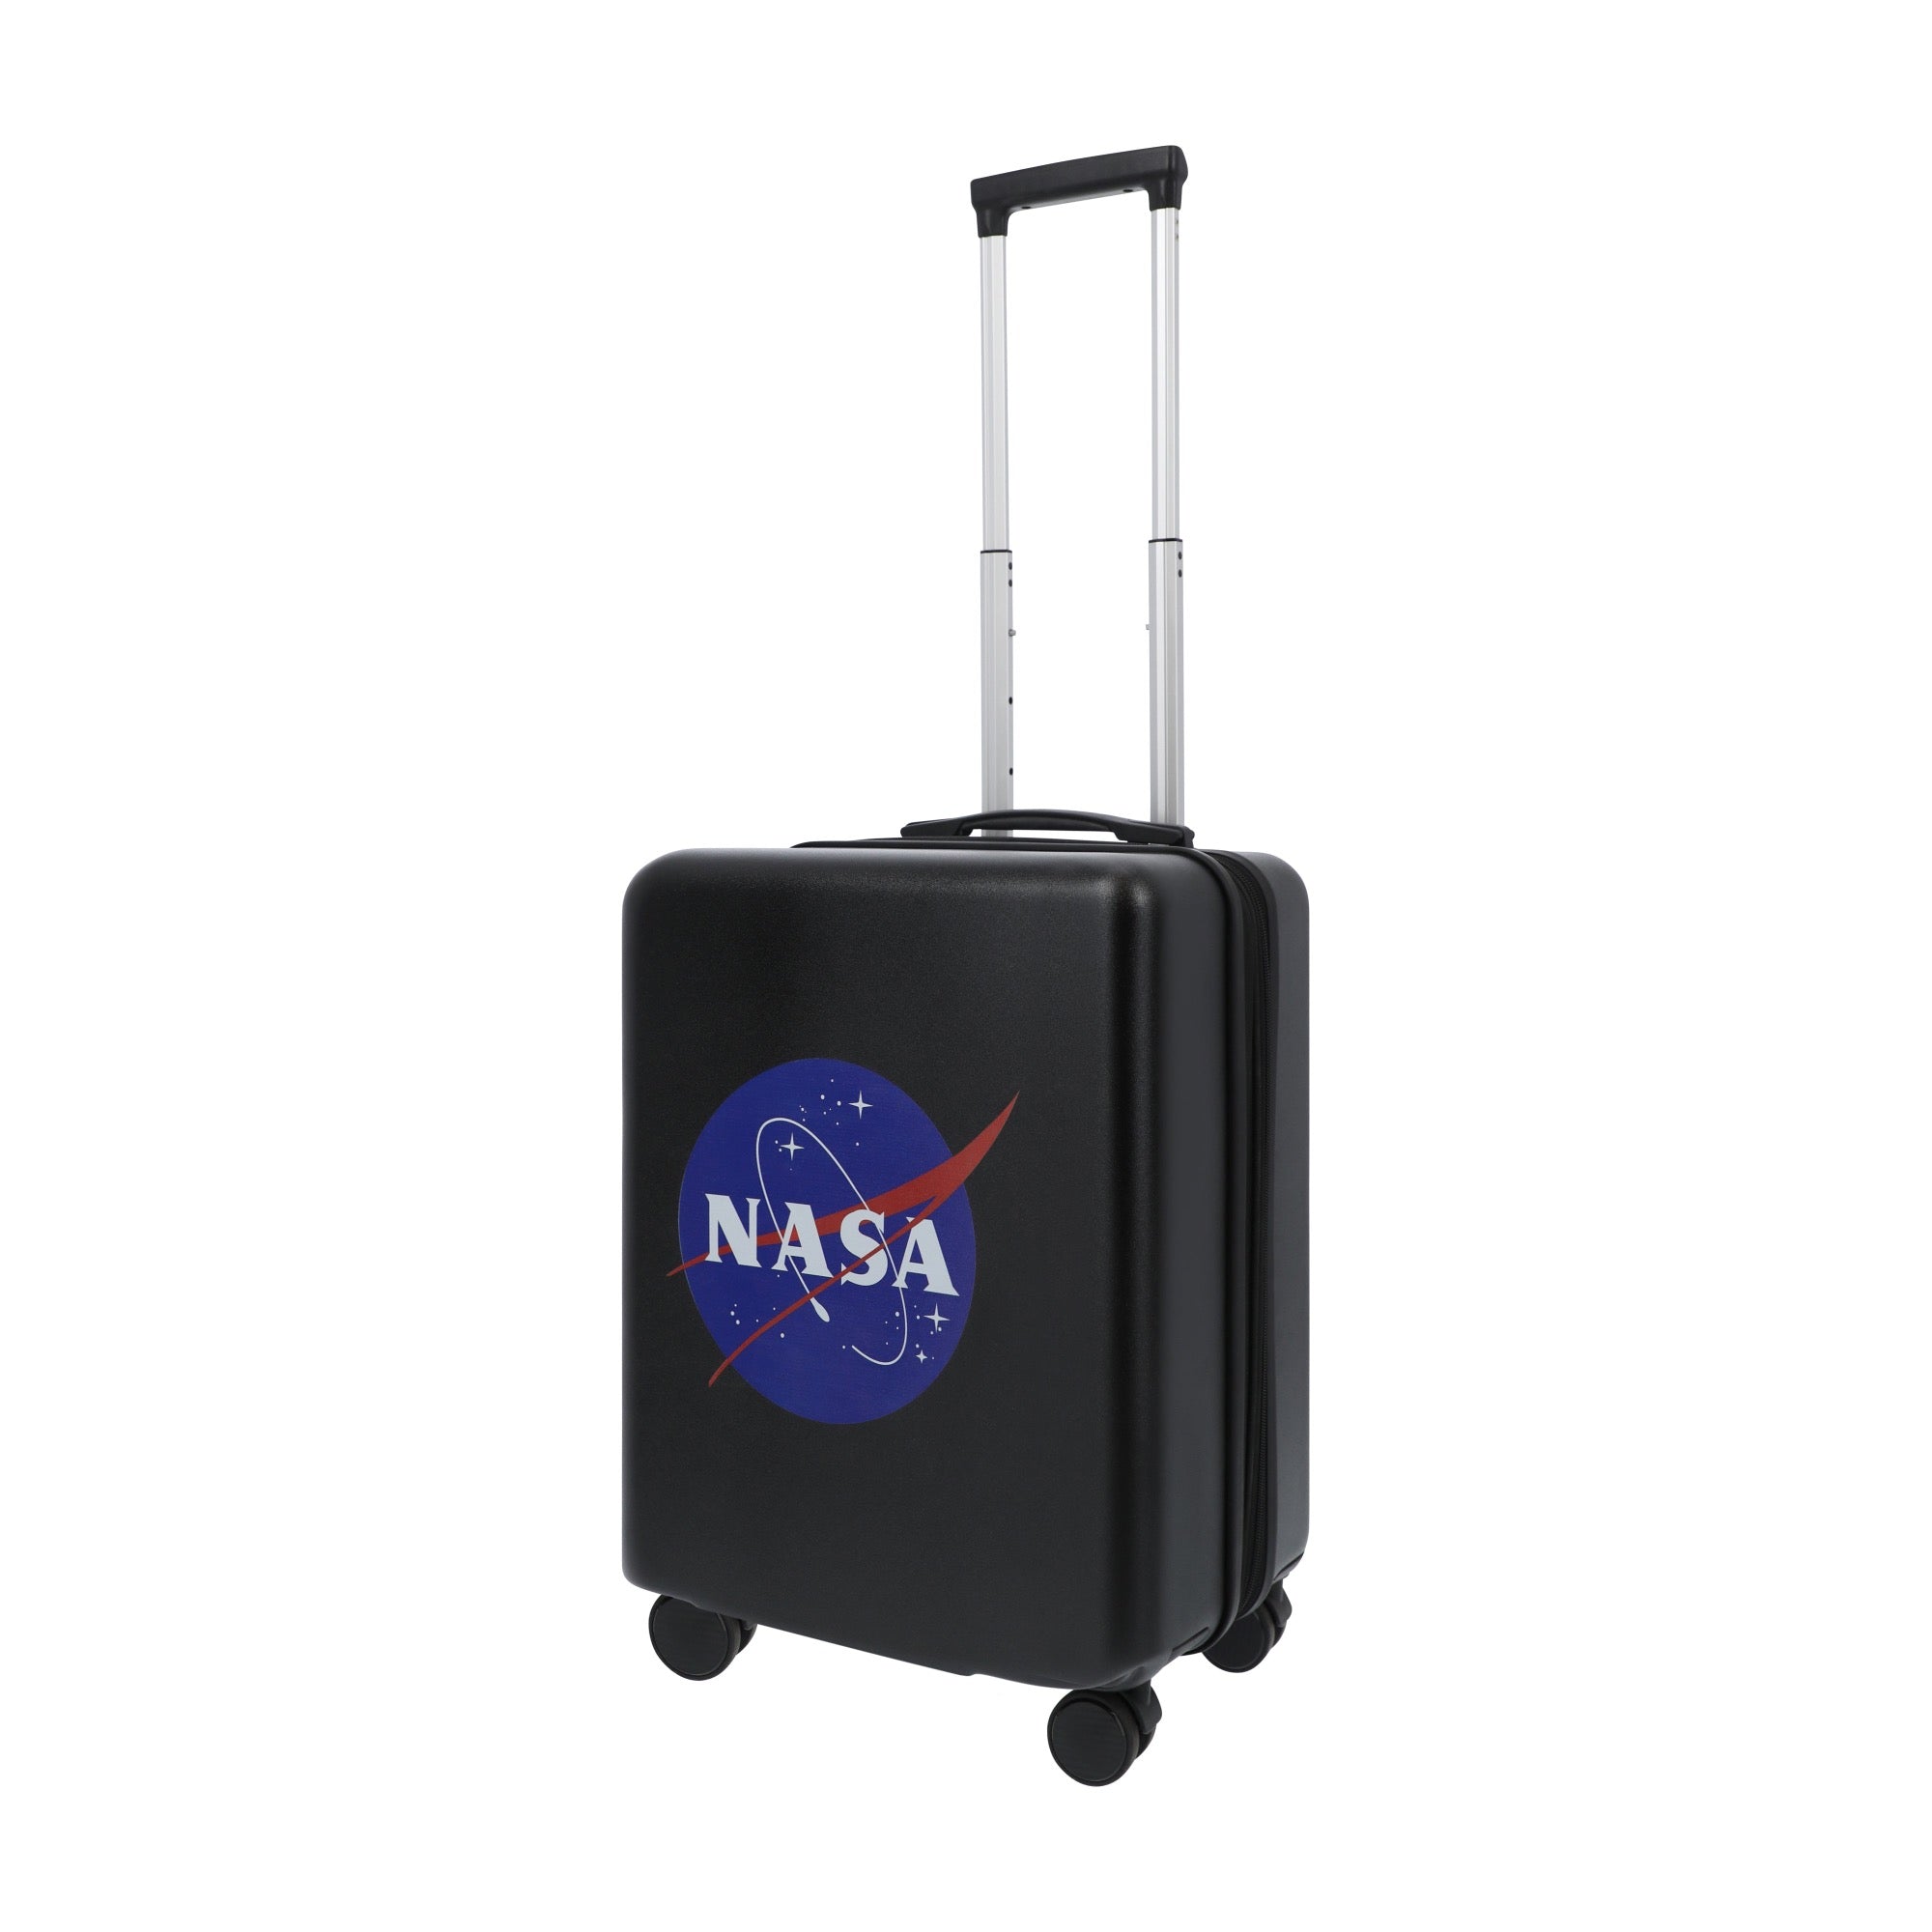 Black nasa 22.5" carry-on spinner suitcase luggage by Ful